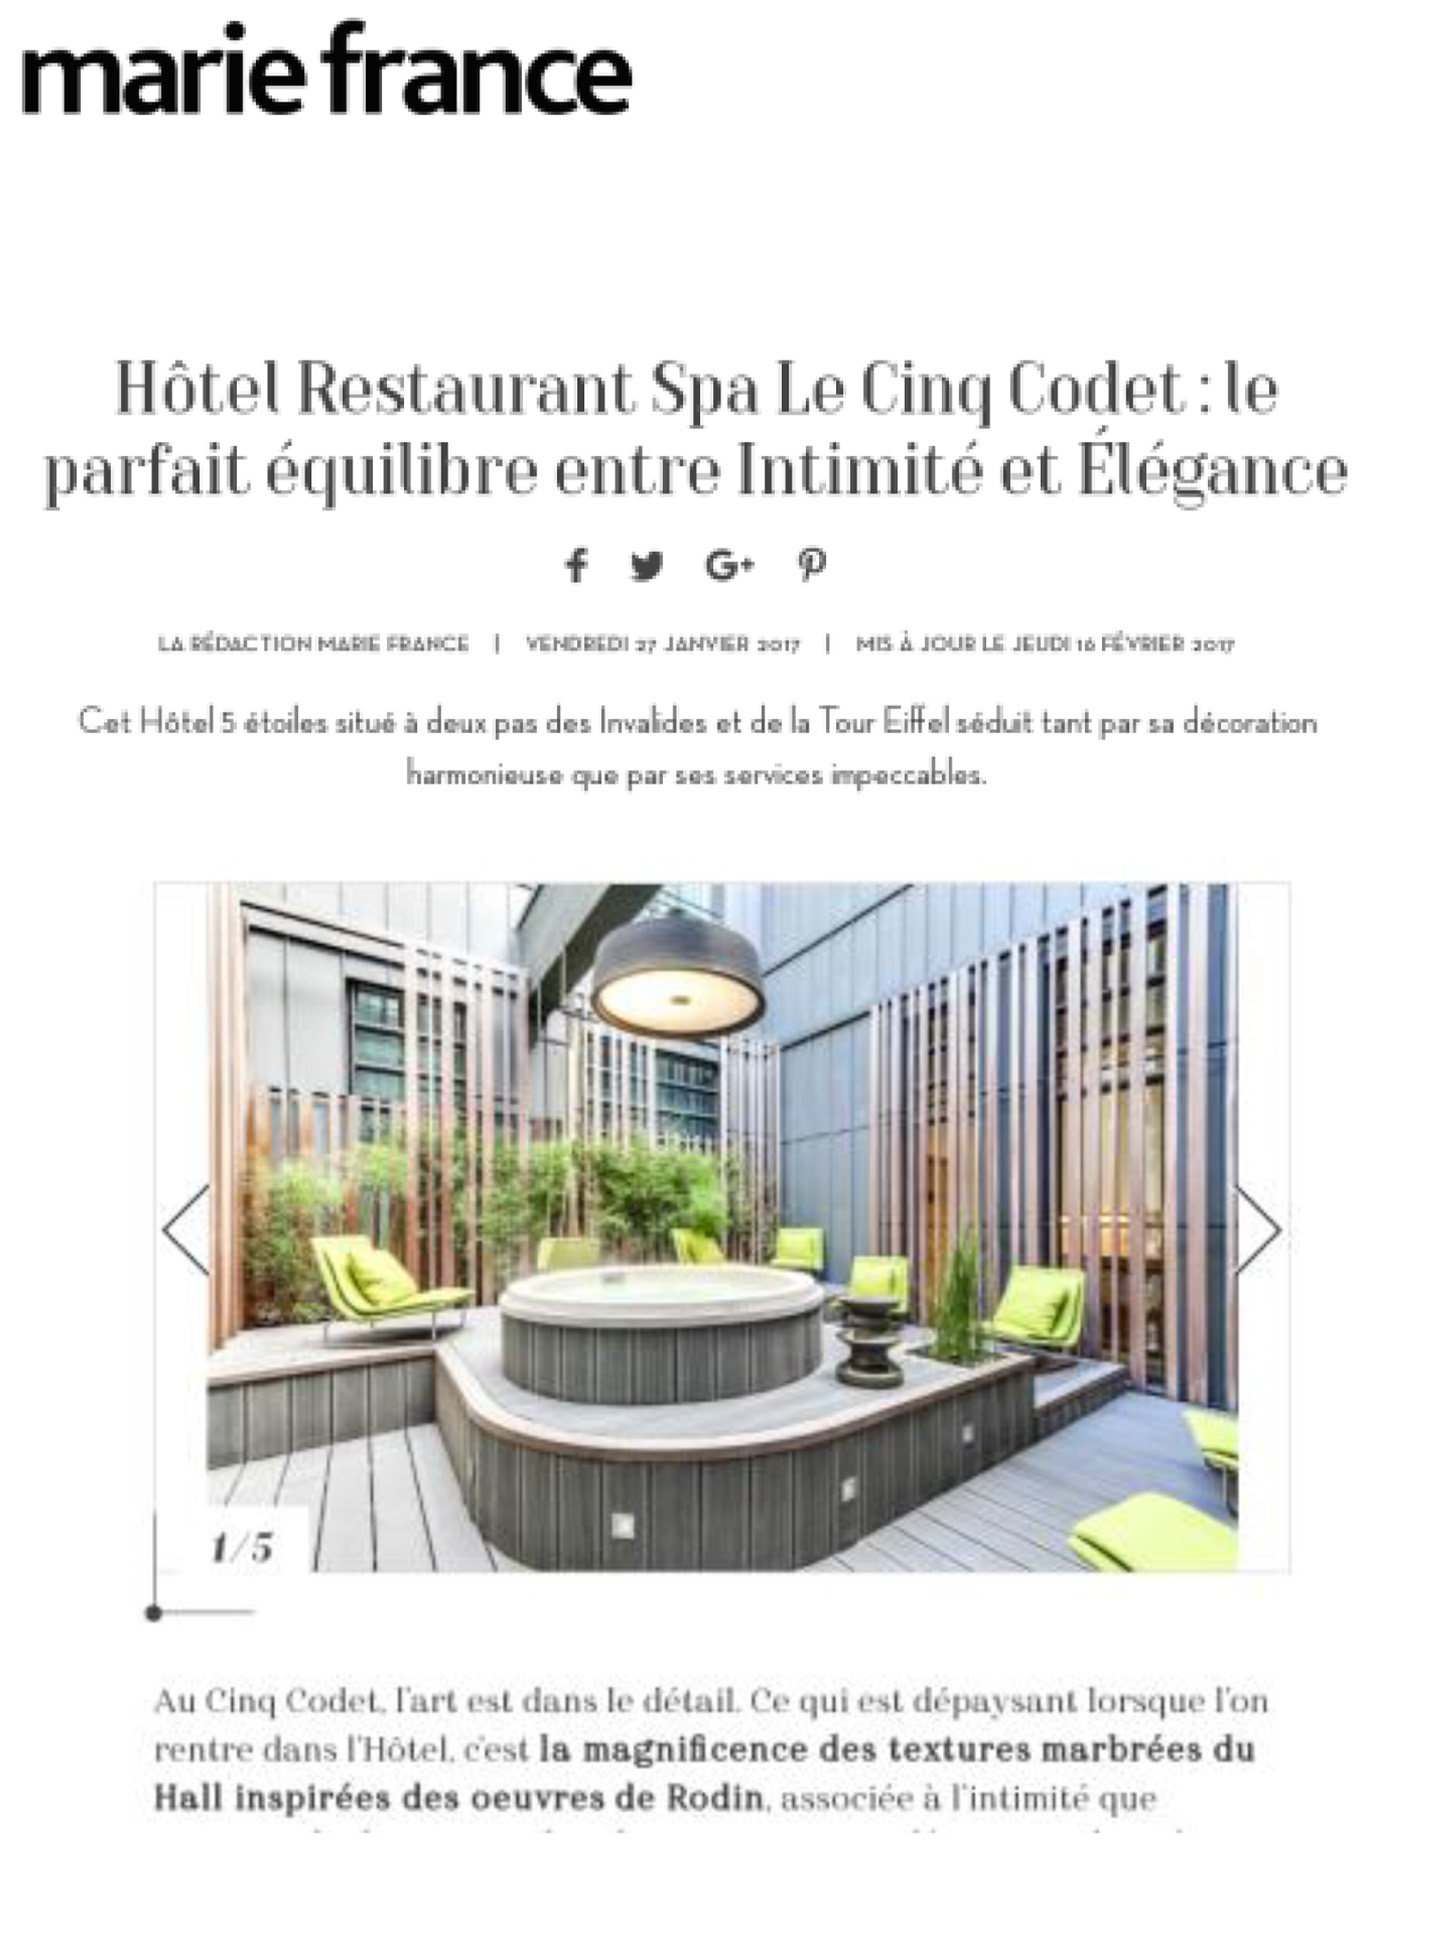 Article on the Cinq Codet designed by the jean-Philippe Nuel studio in the magazine marie france, new lifestyle hotel, luxury interior design, paris center, french luxury hotel